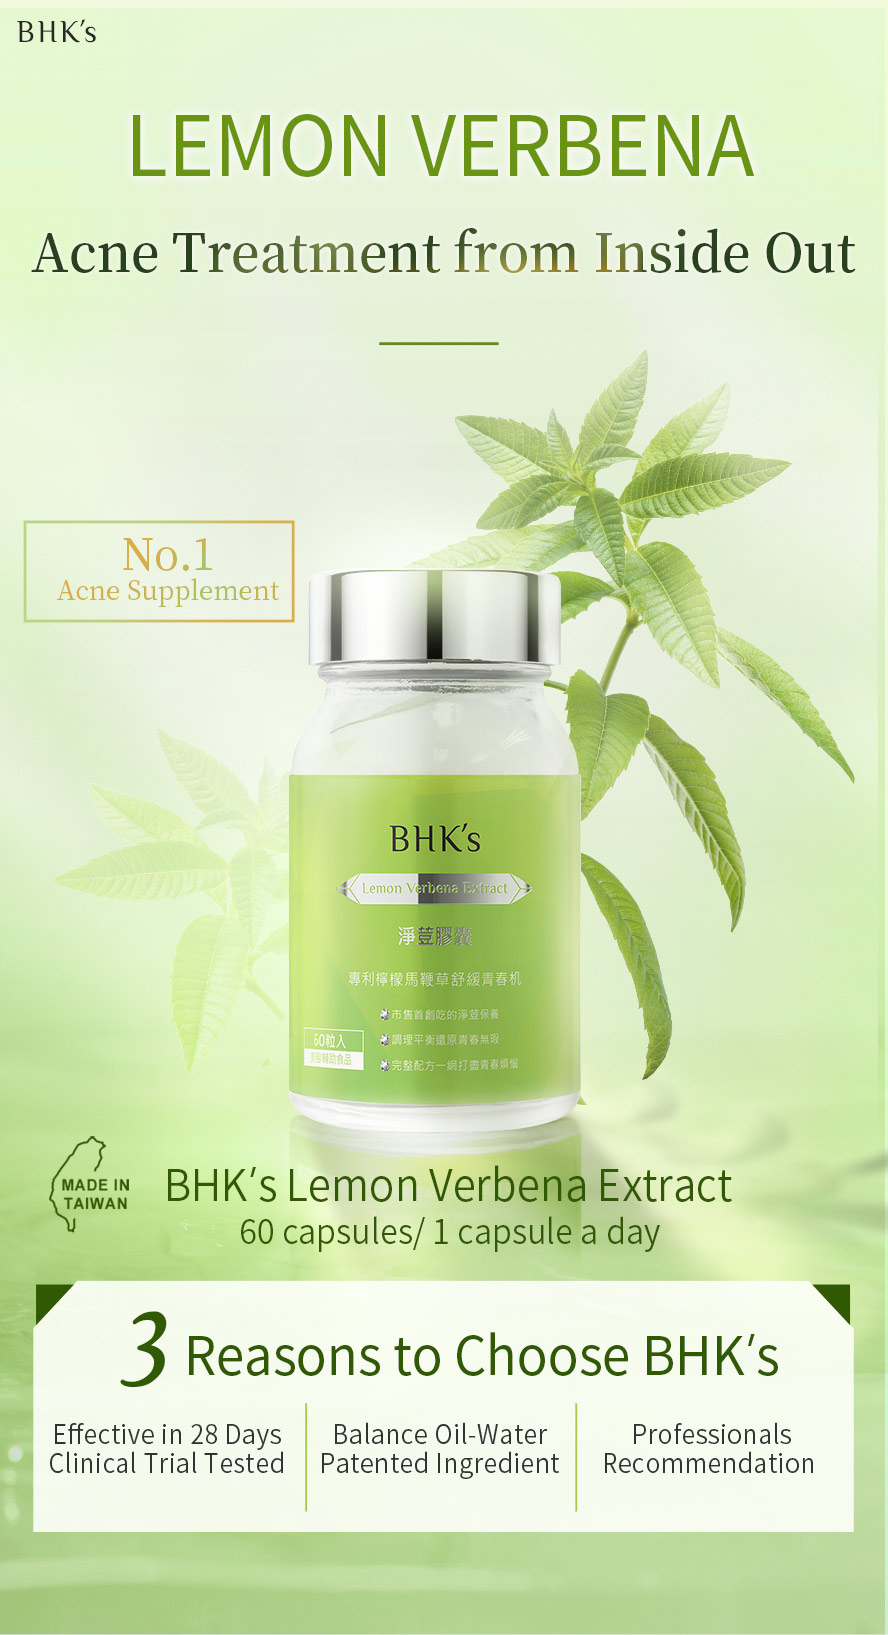 BHK's Lemon Verbena Extract Capsules help anti-acne with patented ingredients and recommendations by professionals